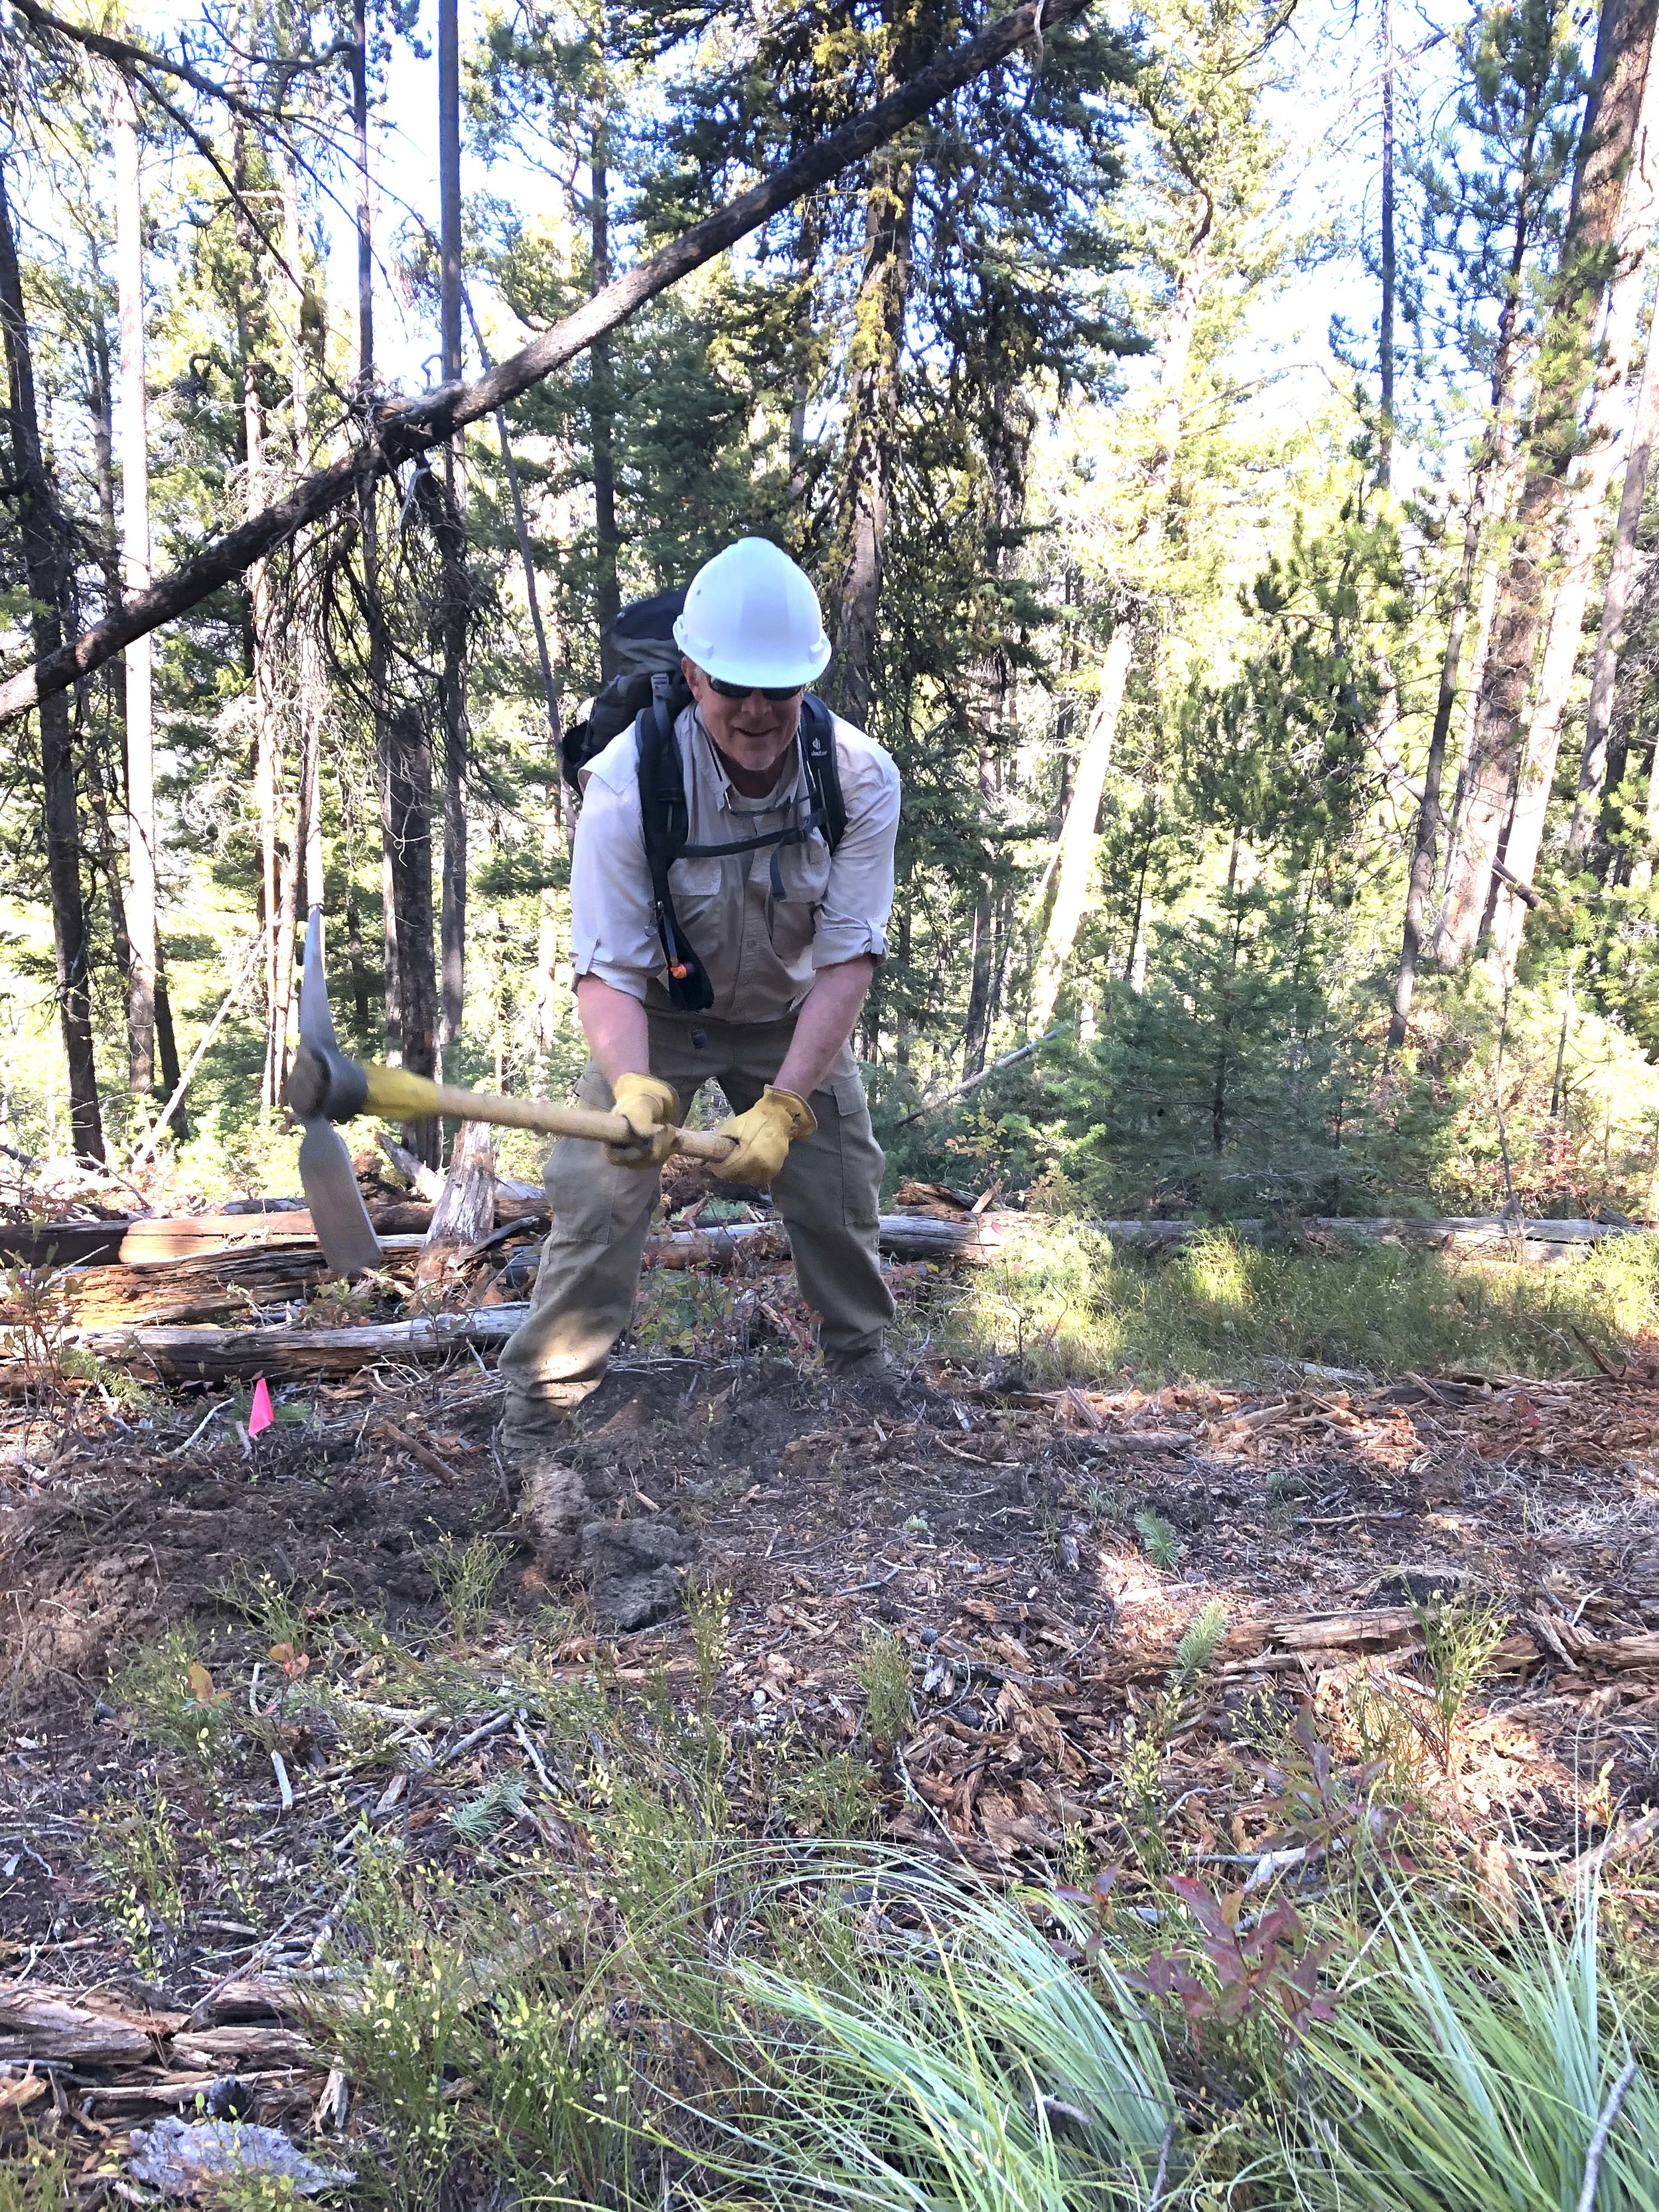 Bill Baer puts his back into clearing the new trail